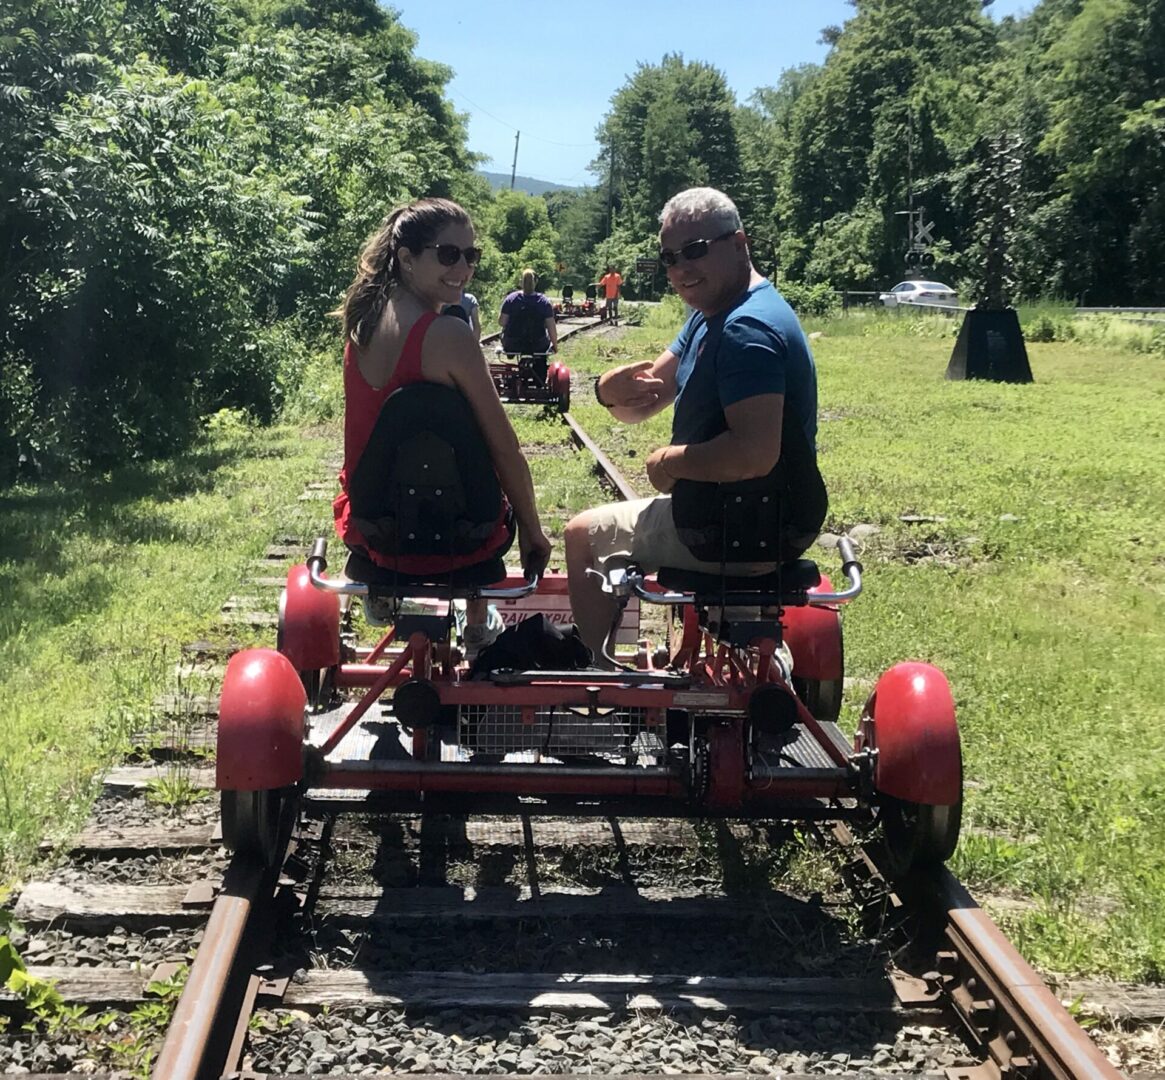 A man and woman riding on the back of a red train.